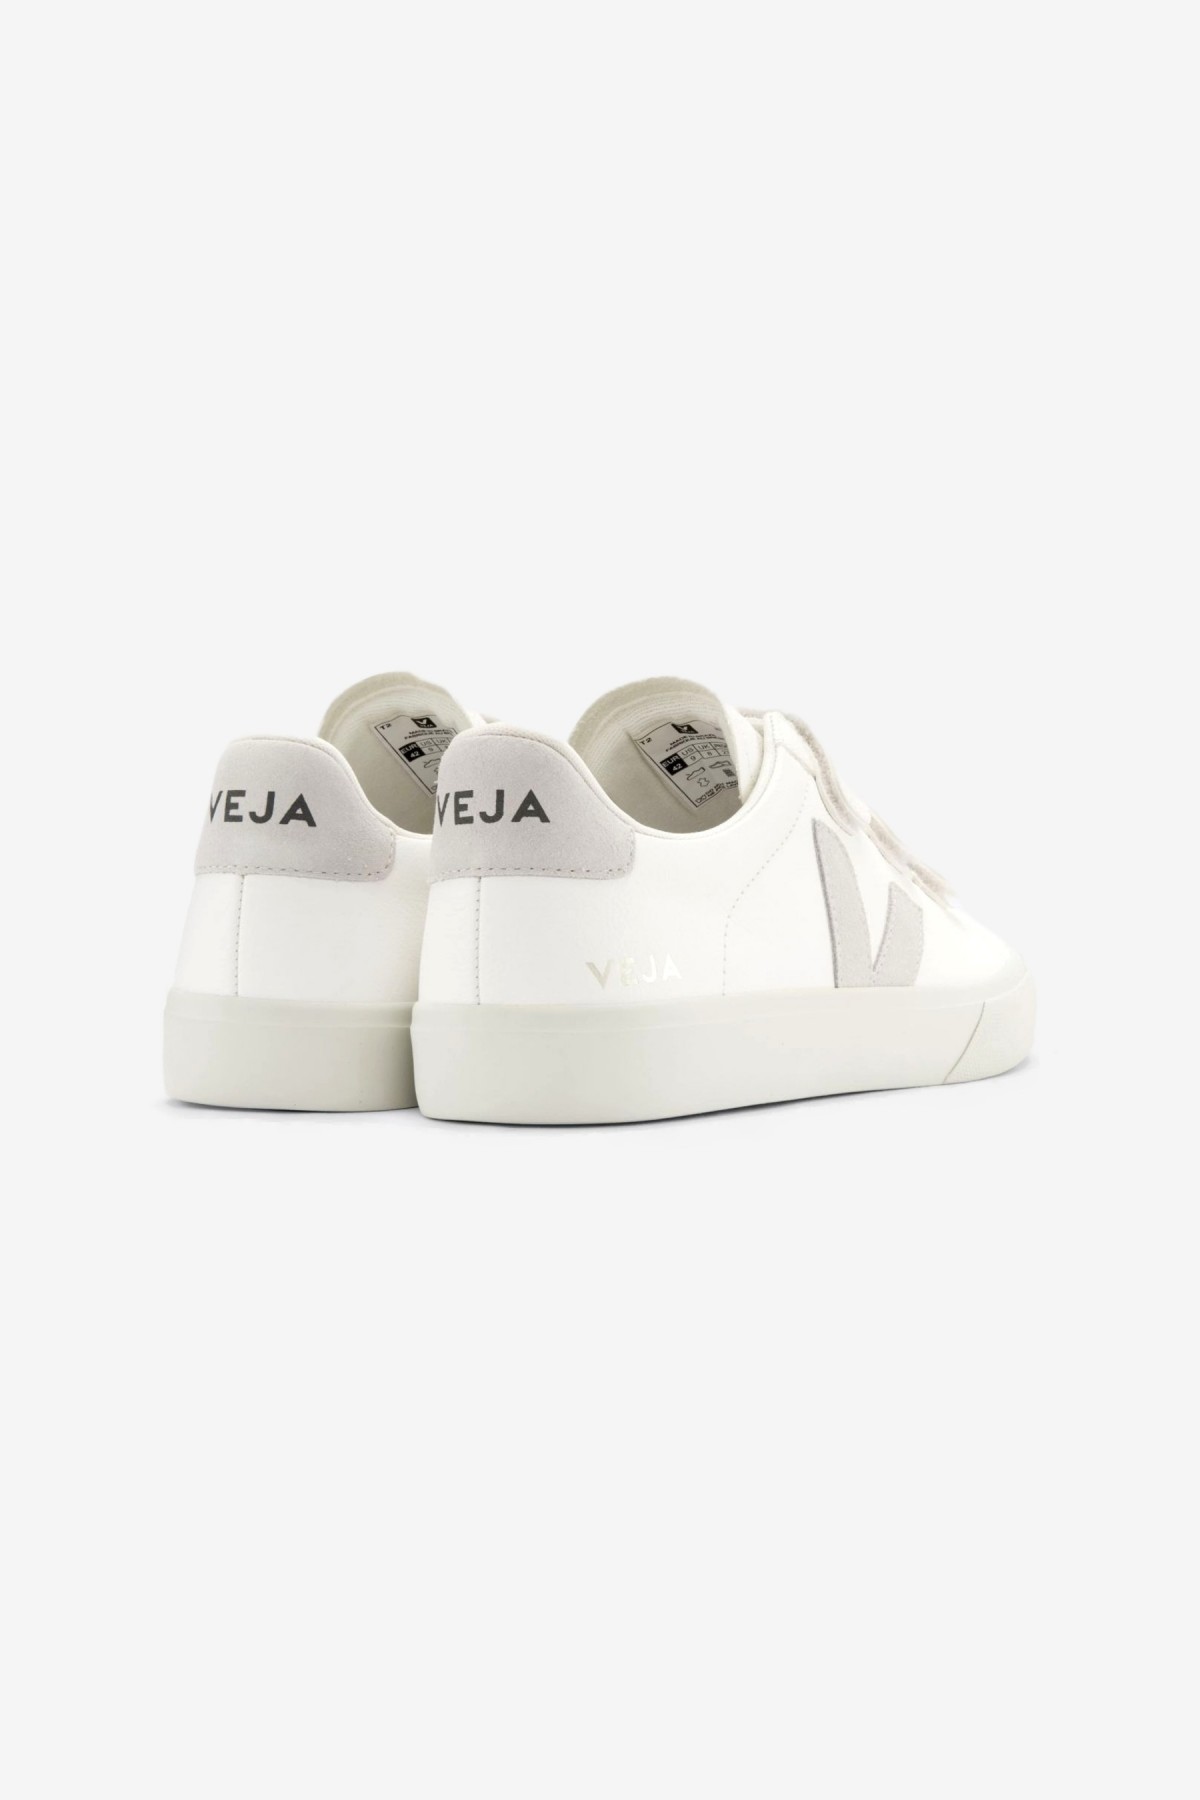 Veja Recife in Extra White Natural Leather